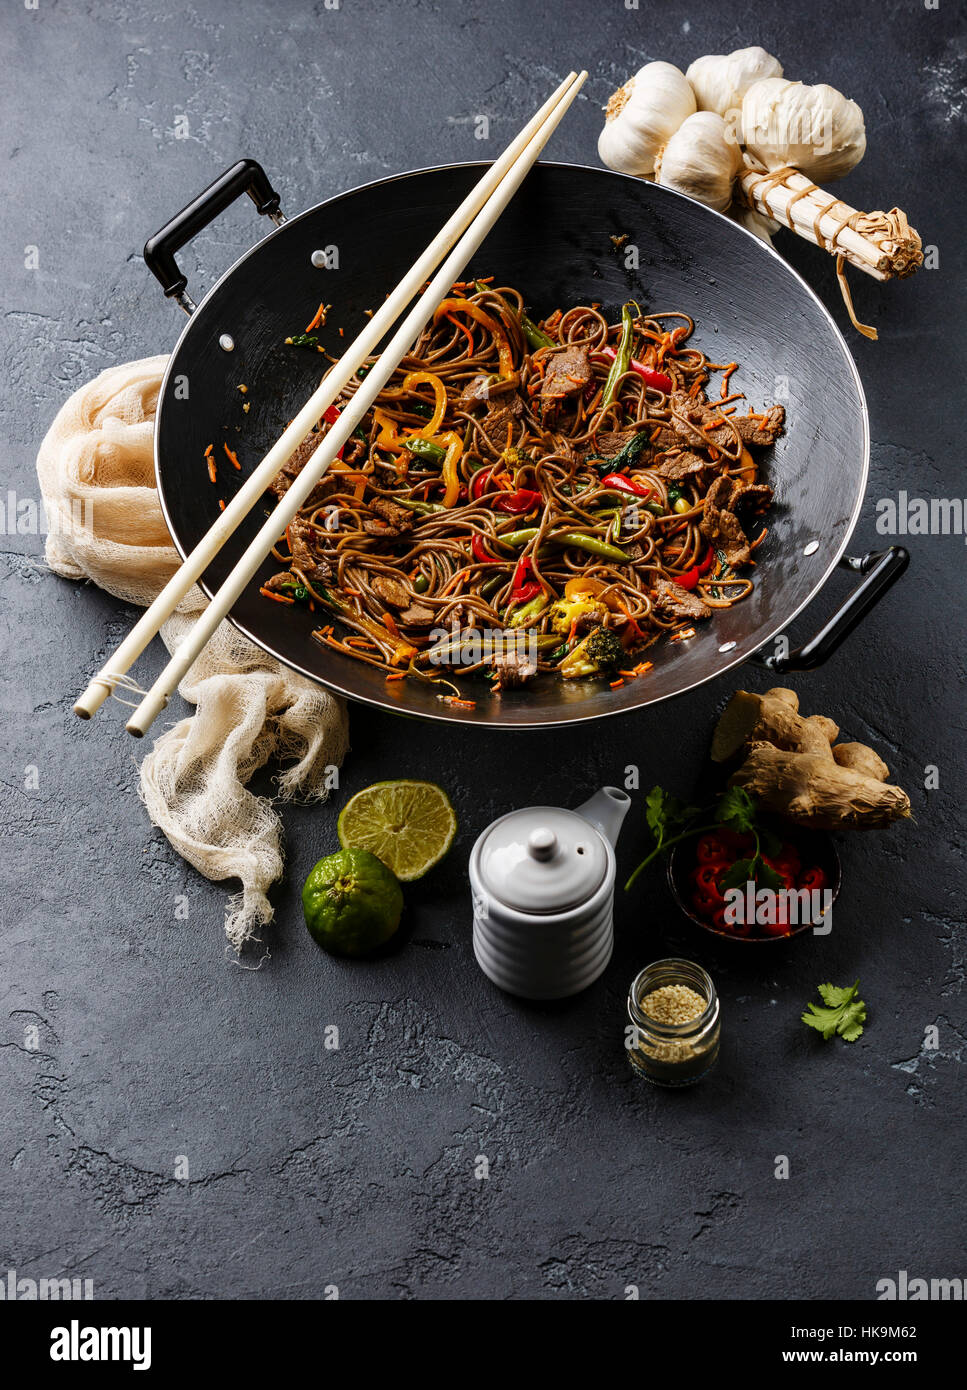 Asian fast food Stir fry noodles soba with beef and vegetables in wok pan  on dark stone background Stock Photo - Alamy